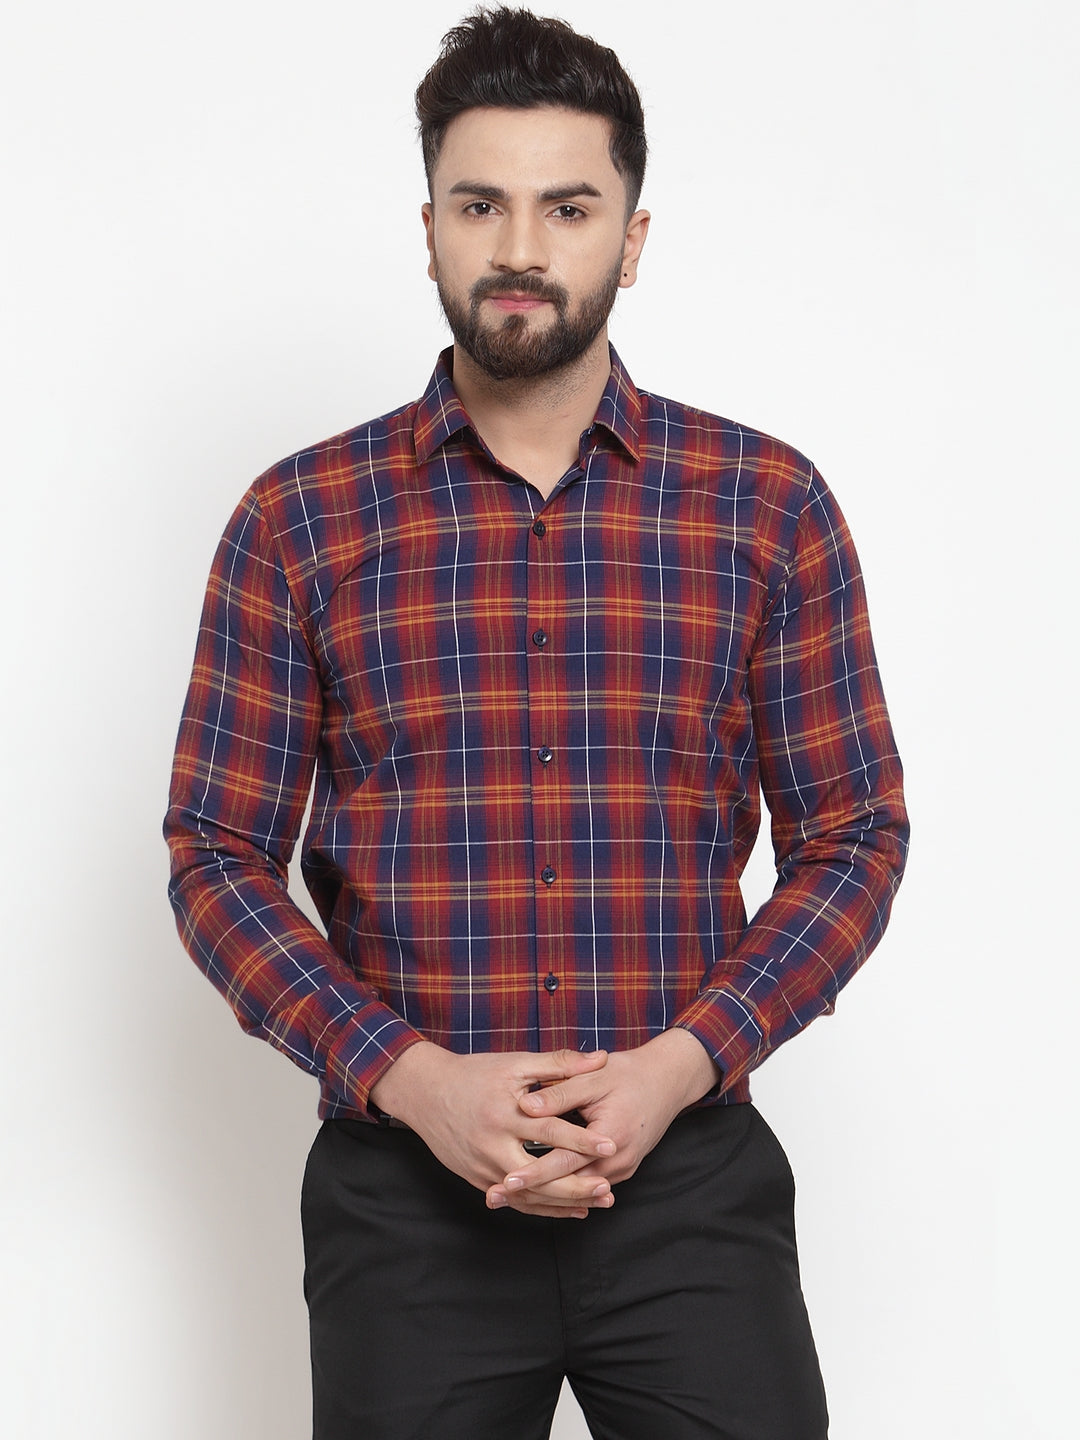 Men's Multi Cotton Checked Formal Shirts ( SF 741Blue-Red ) - Jainish